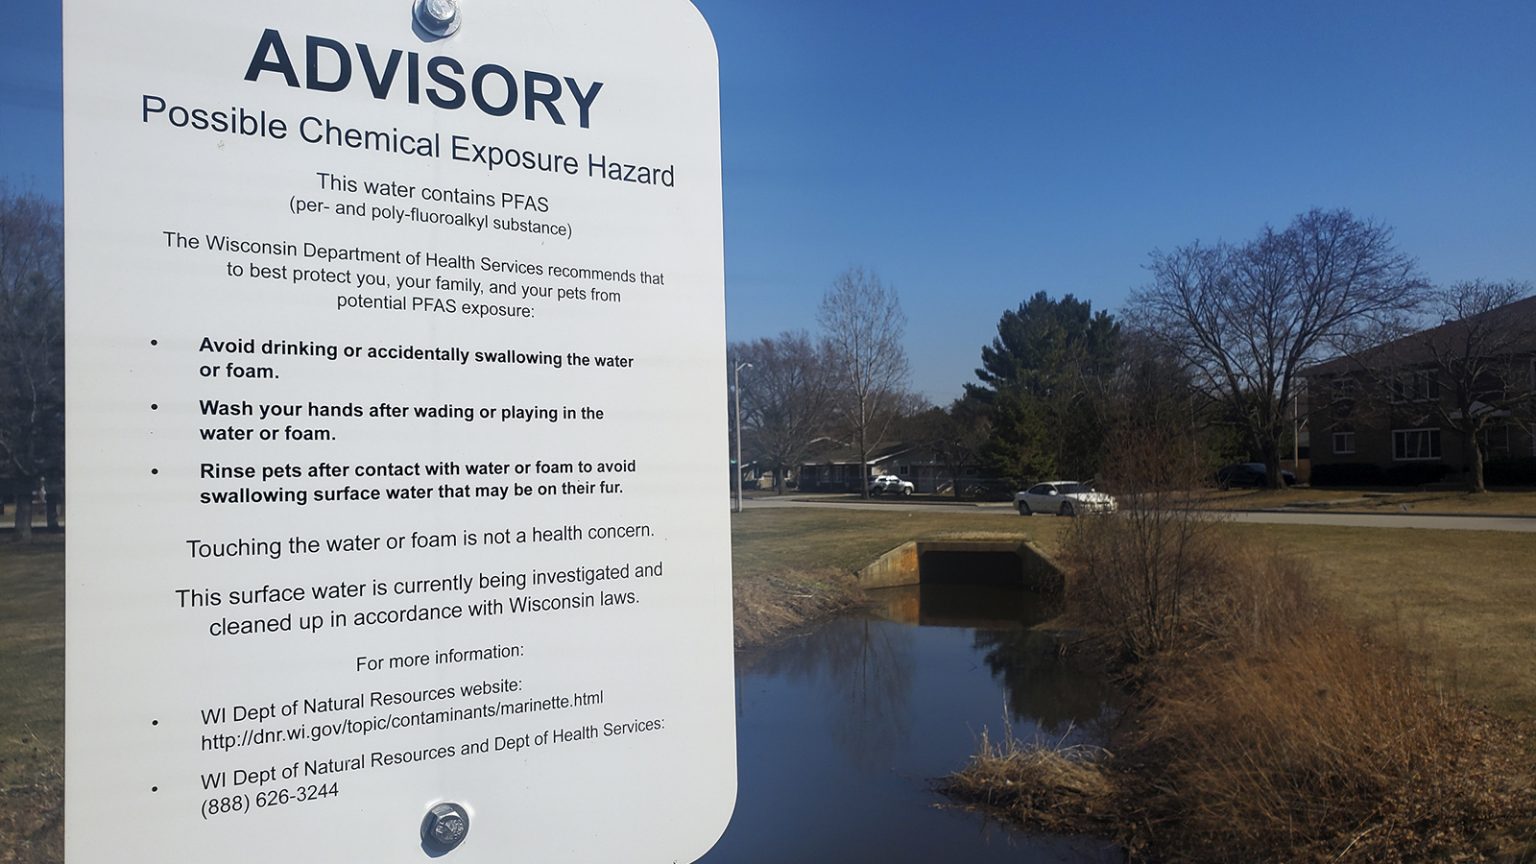 Sign warning of possible chemical exposure hazard above ditch and culvert with houses in background